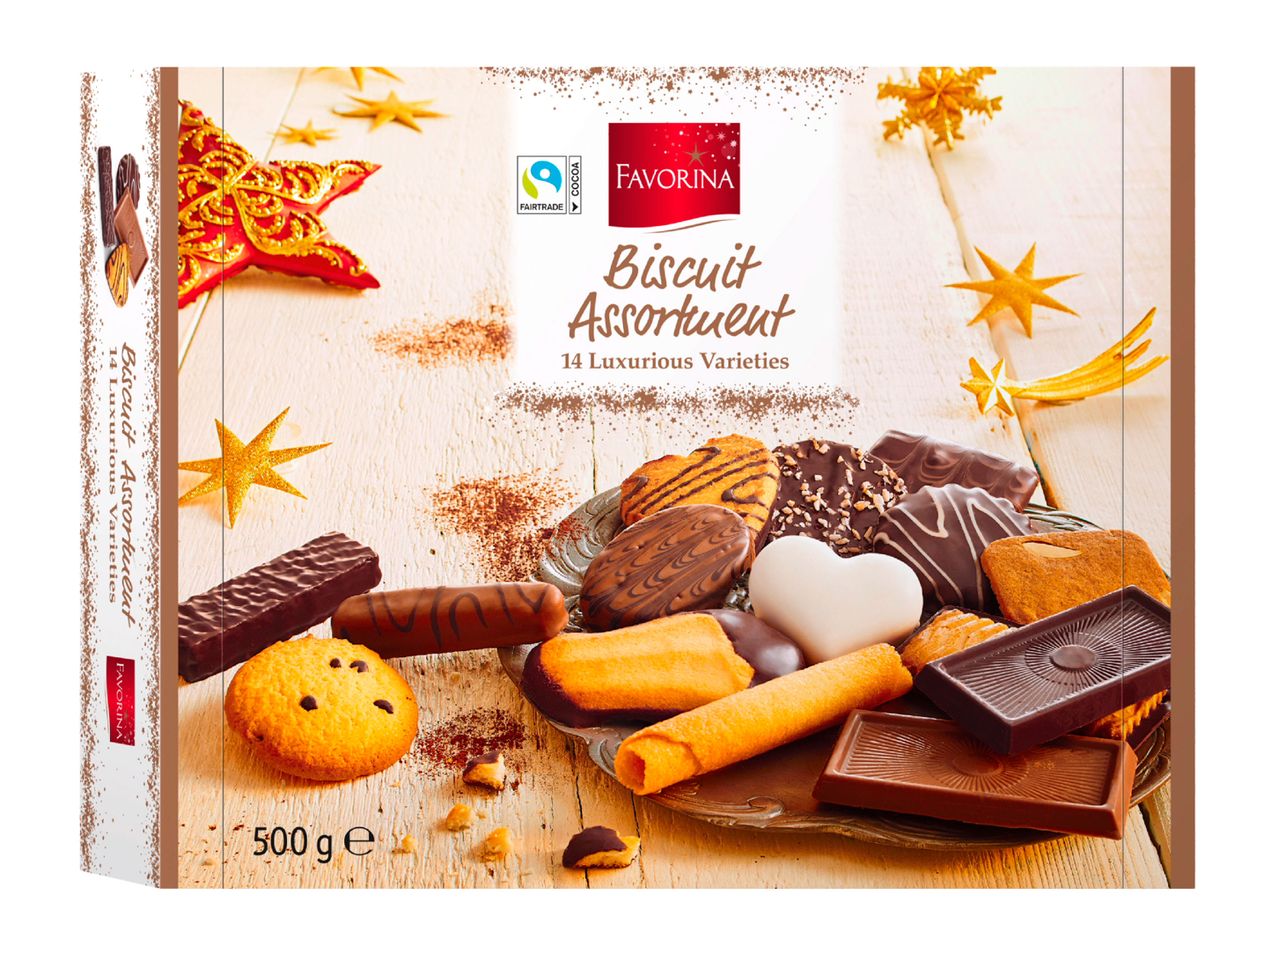 Go to full screen view: Favorina Continental Biscuit Selection - Image 1